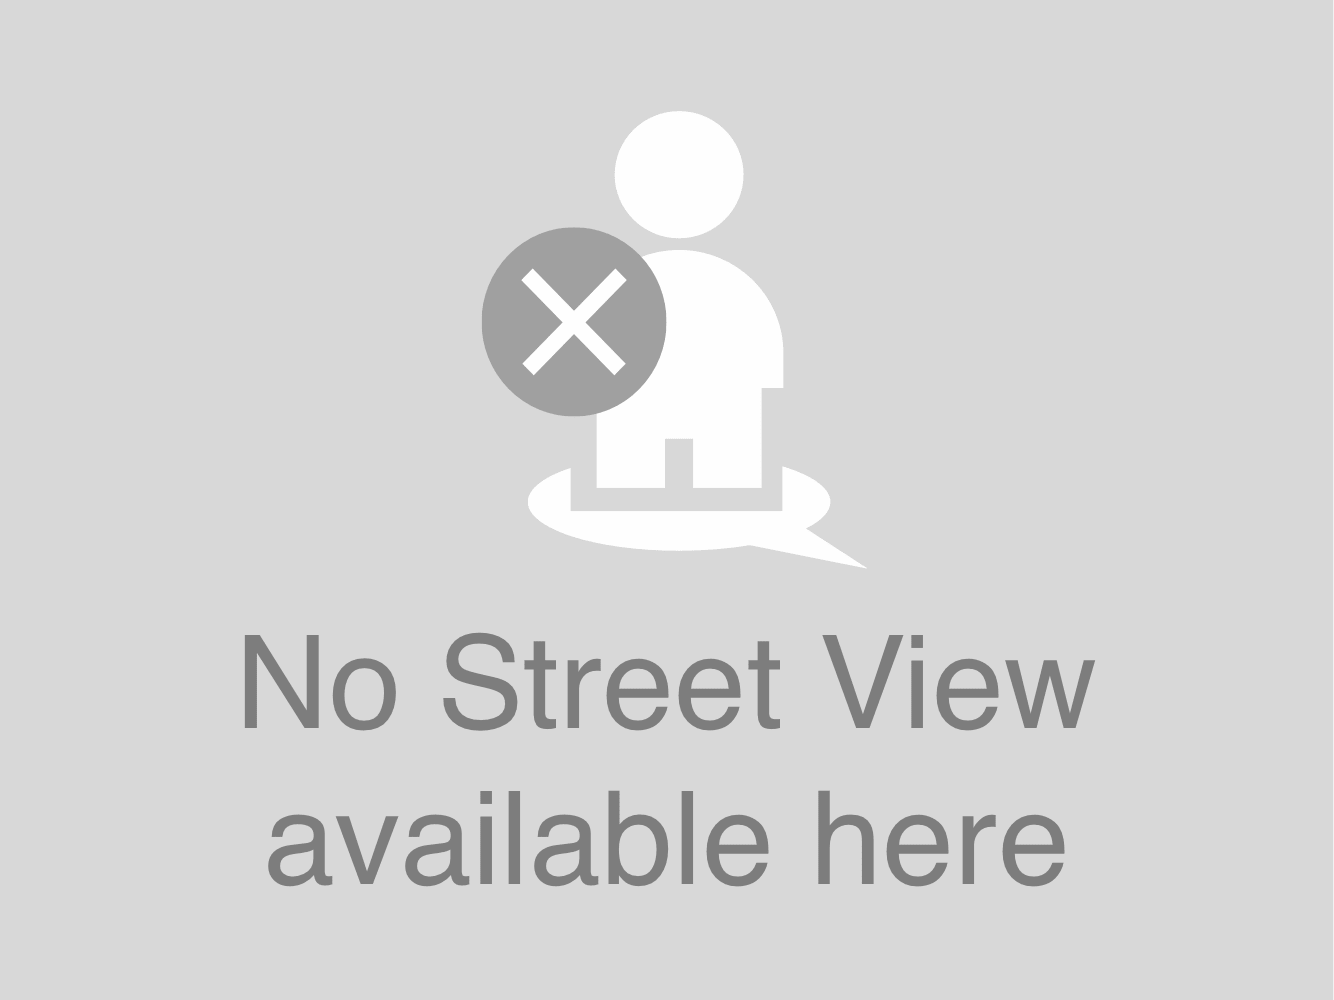 No street view image available